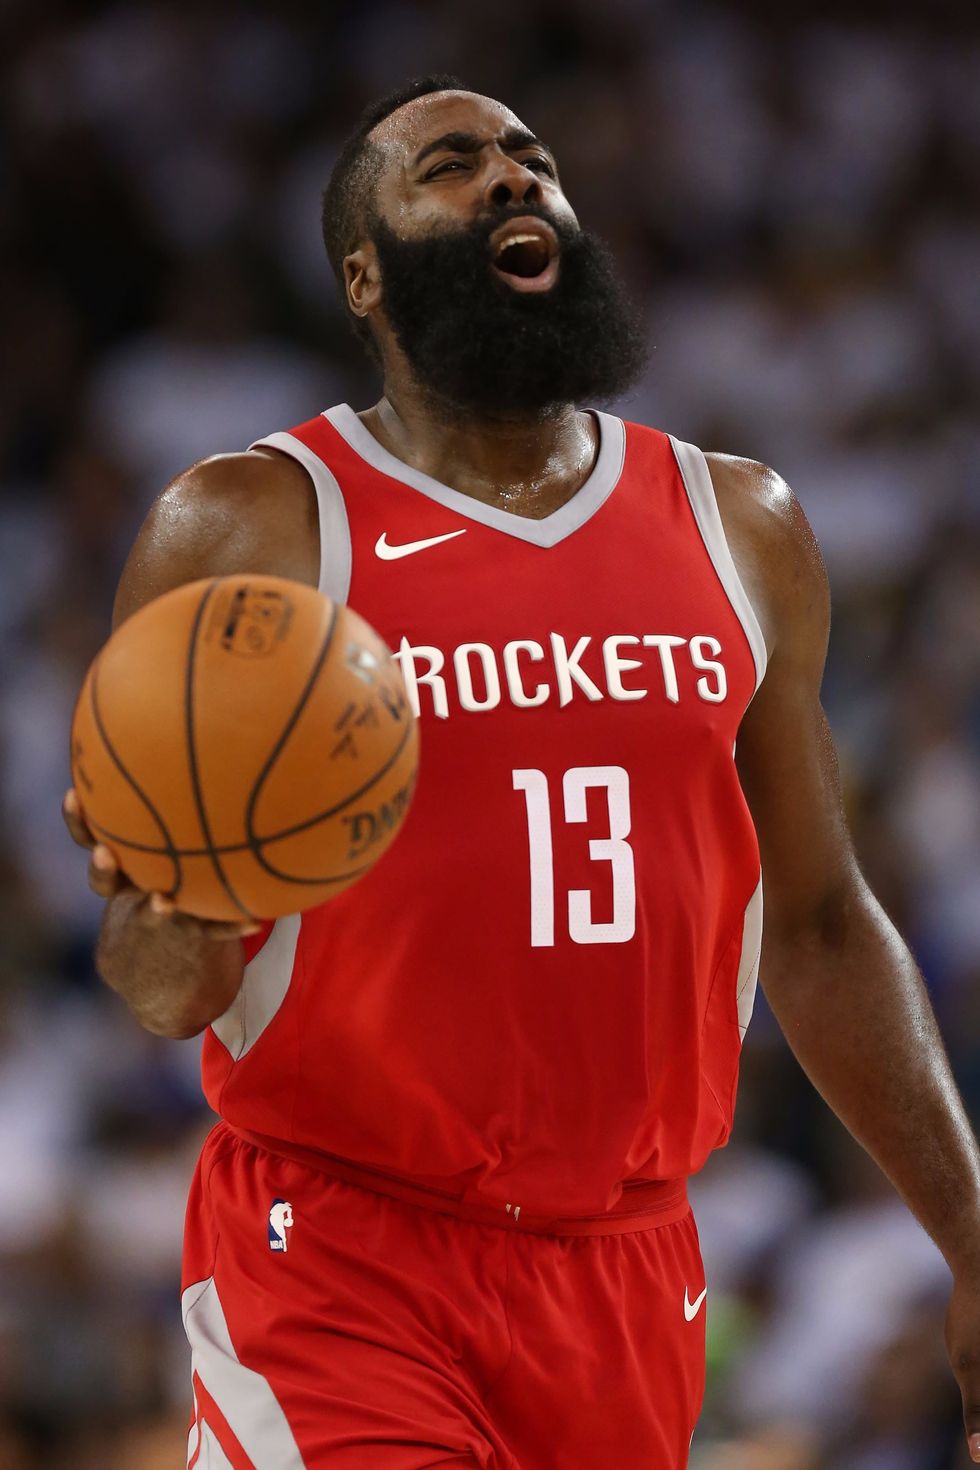 Joel Blank: Would Harden be able to embrace being the second fiddle to LeBron James?